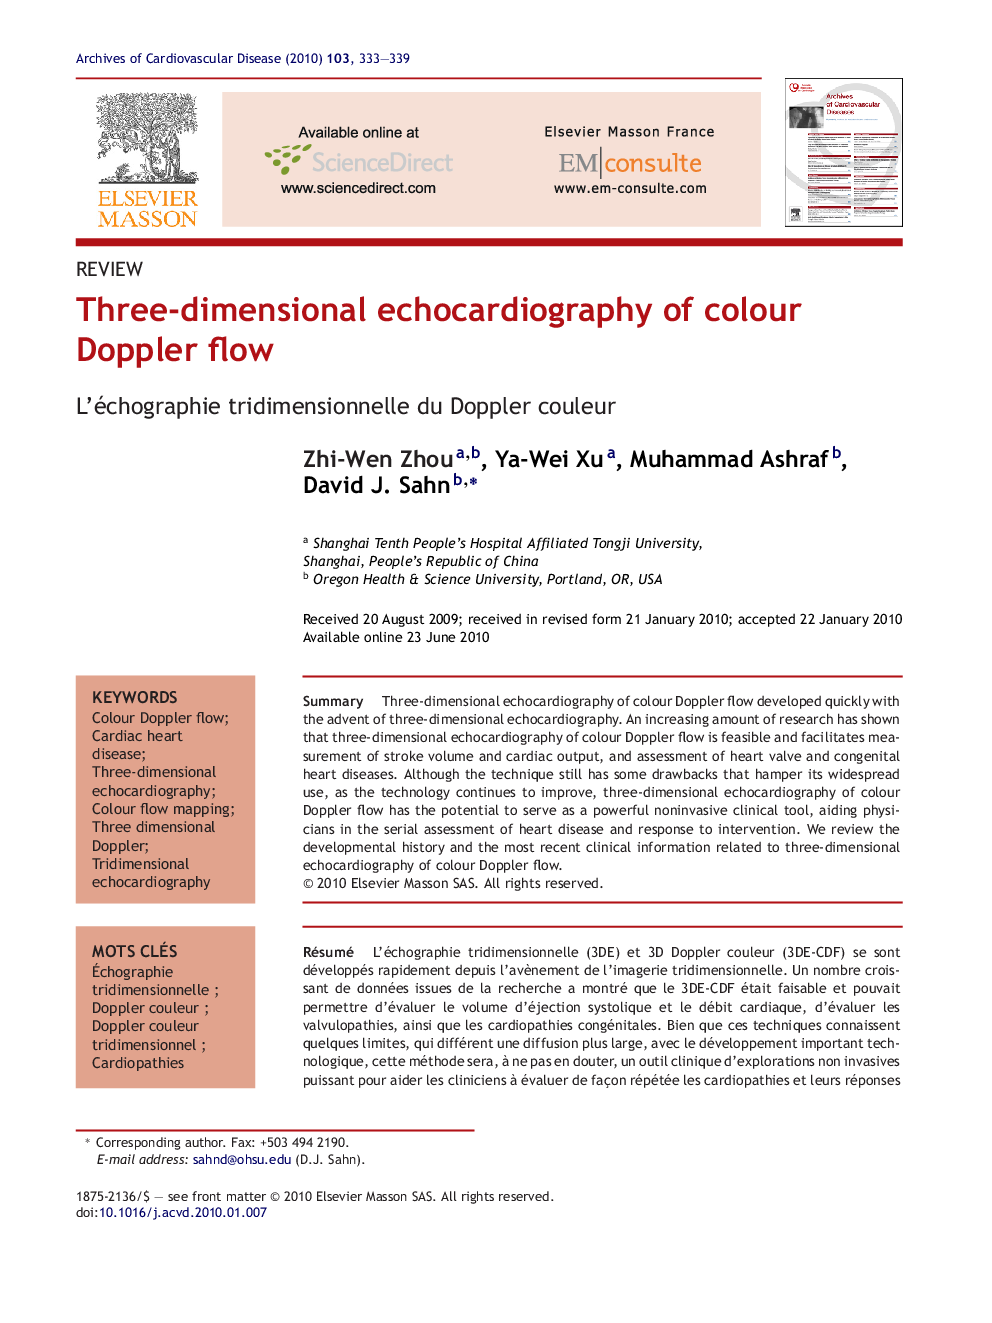 Three-dimensional echocardiography of colour Doppler flow